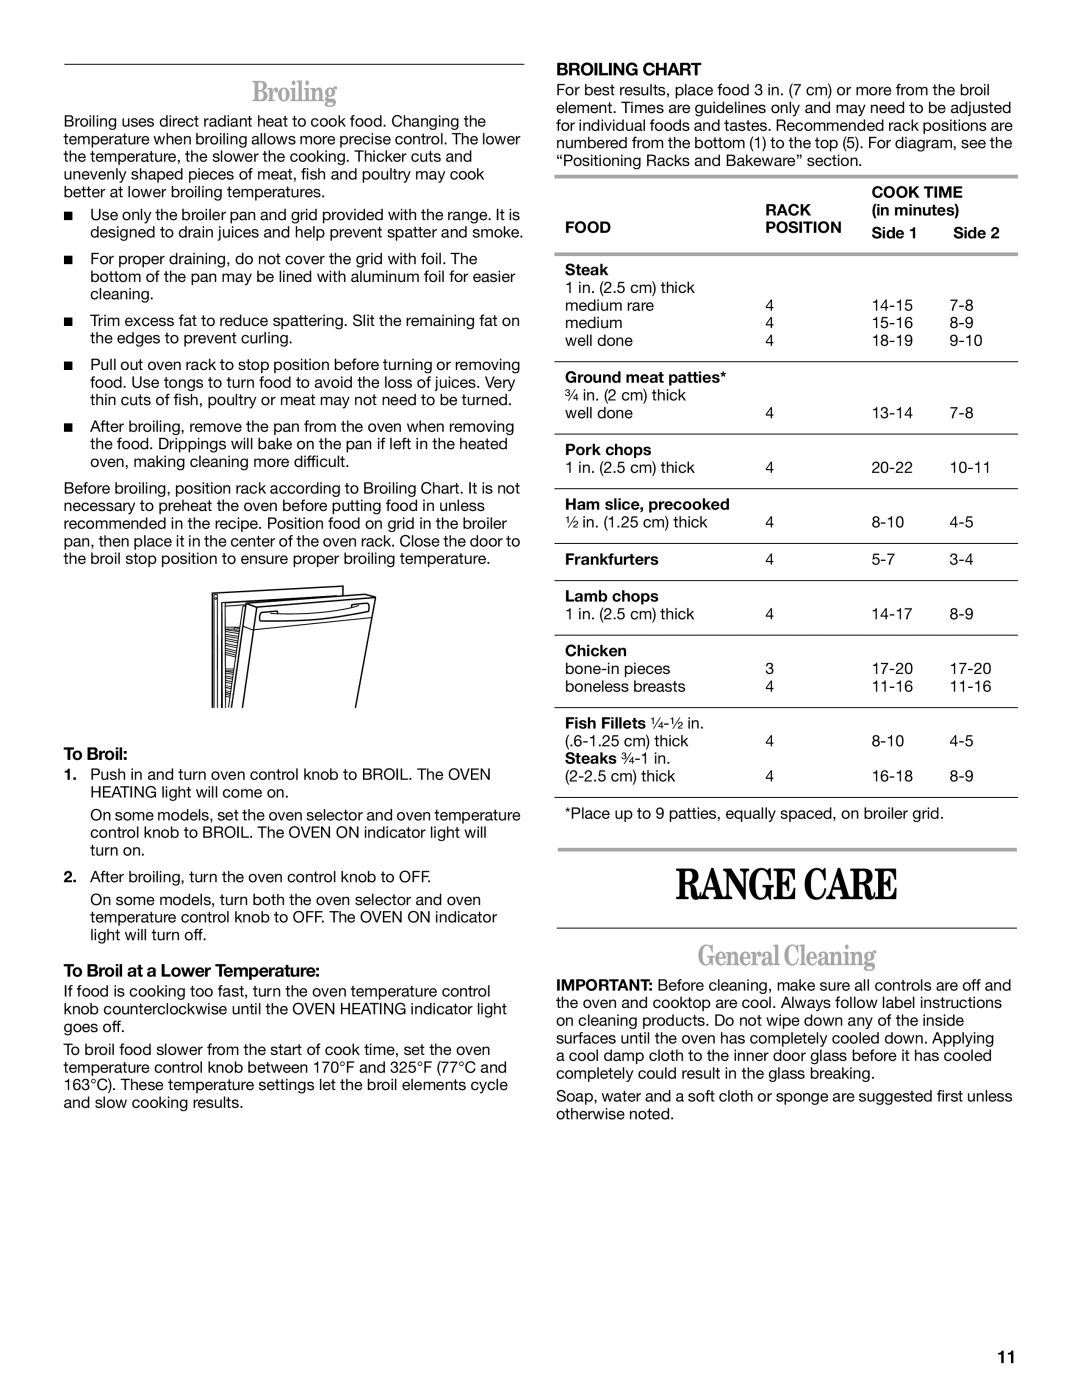 Whirlpool 9753313B manual Range Care, GeneralCleaning, To Broil at a Lower Temperature, Broiling Chart 